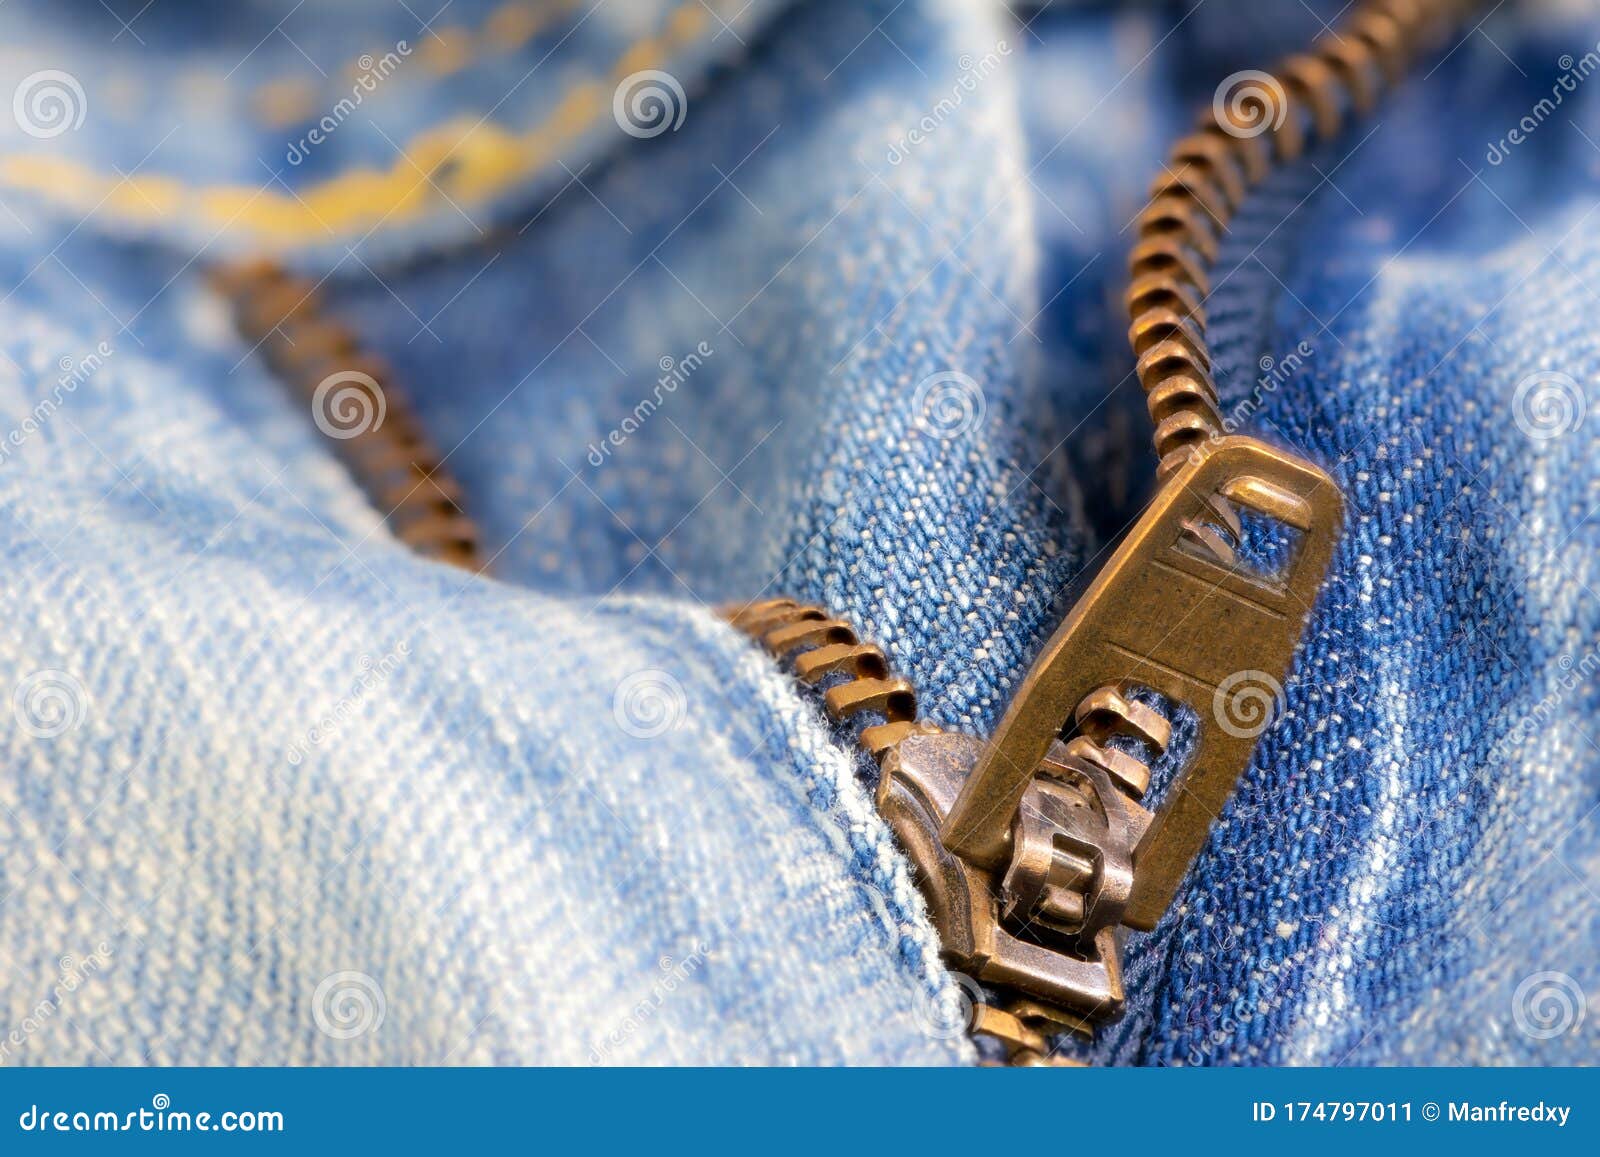 Open Zipper of a Worn Out Jeans Stock Image - Image of denim, texture ...